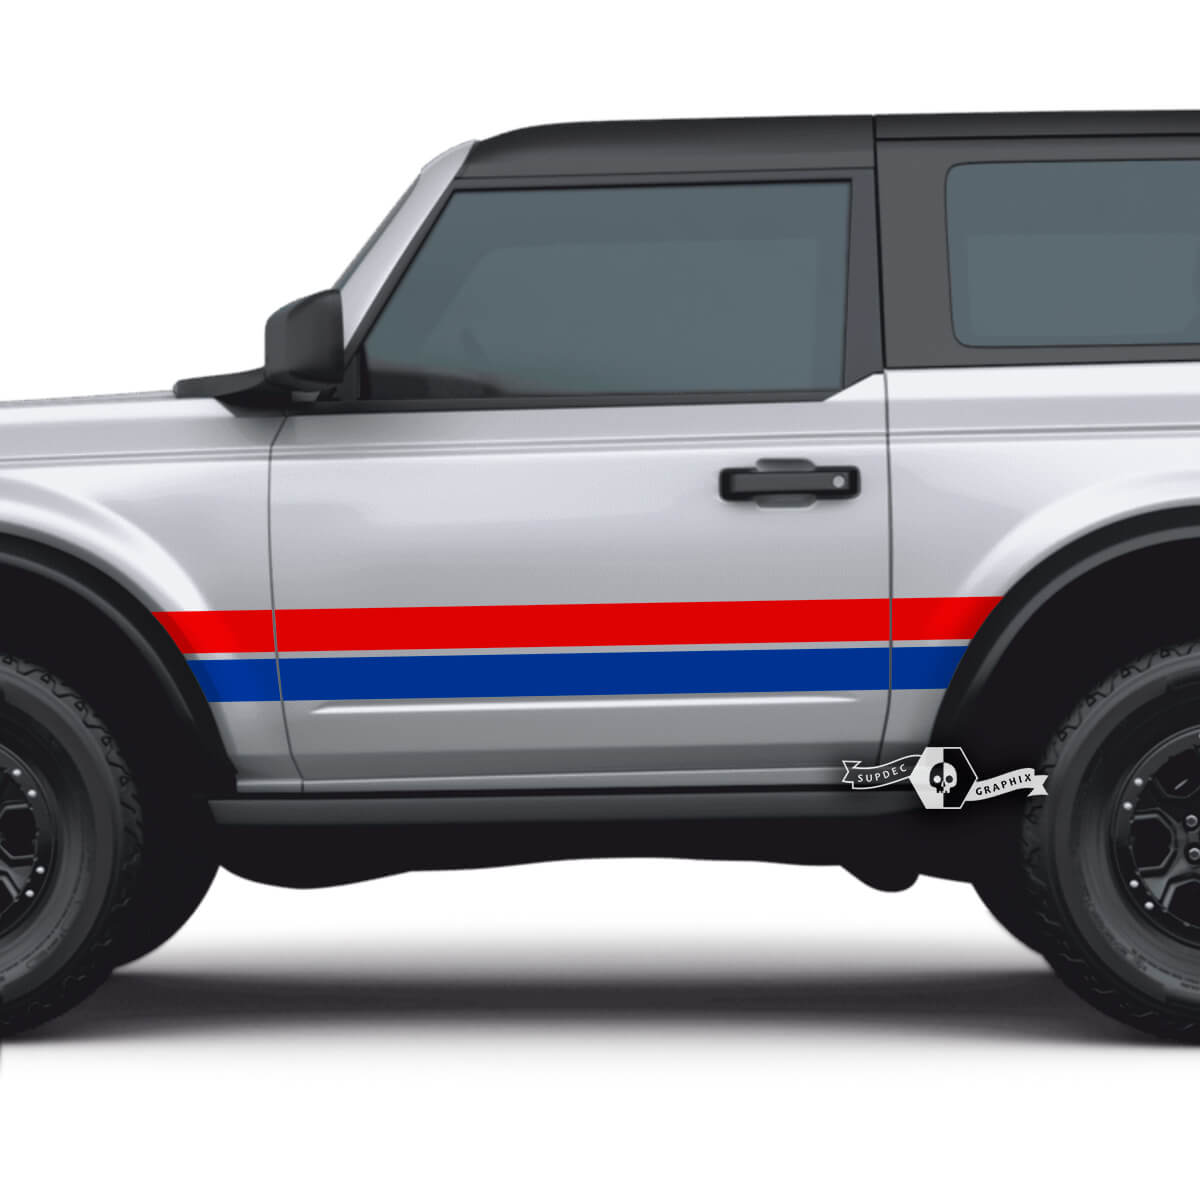 Pair of 2 Doors Ford Bronco Side Stripes Decals Stickers for Ford Bronco 2 Colors
